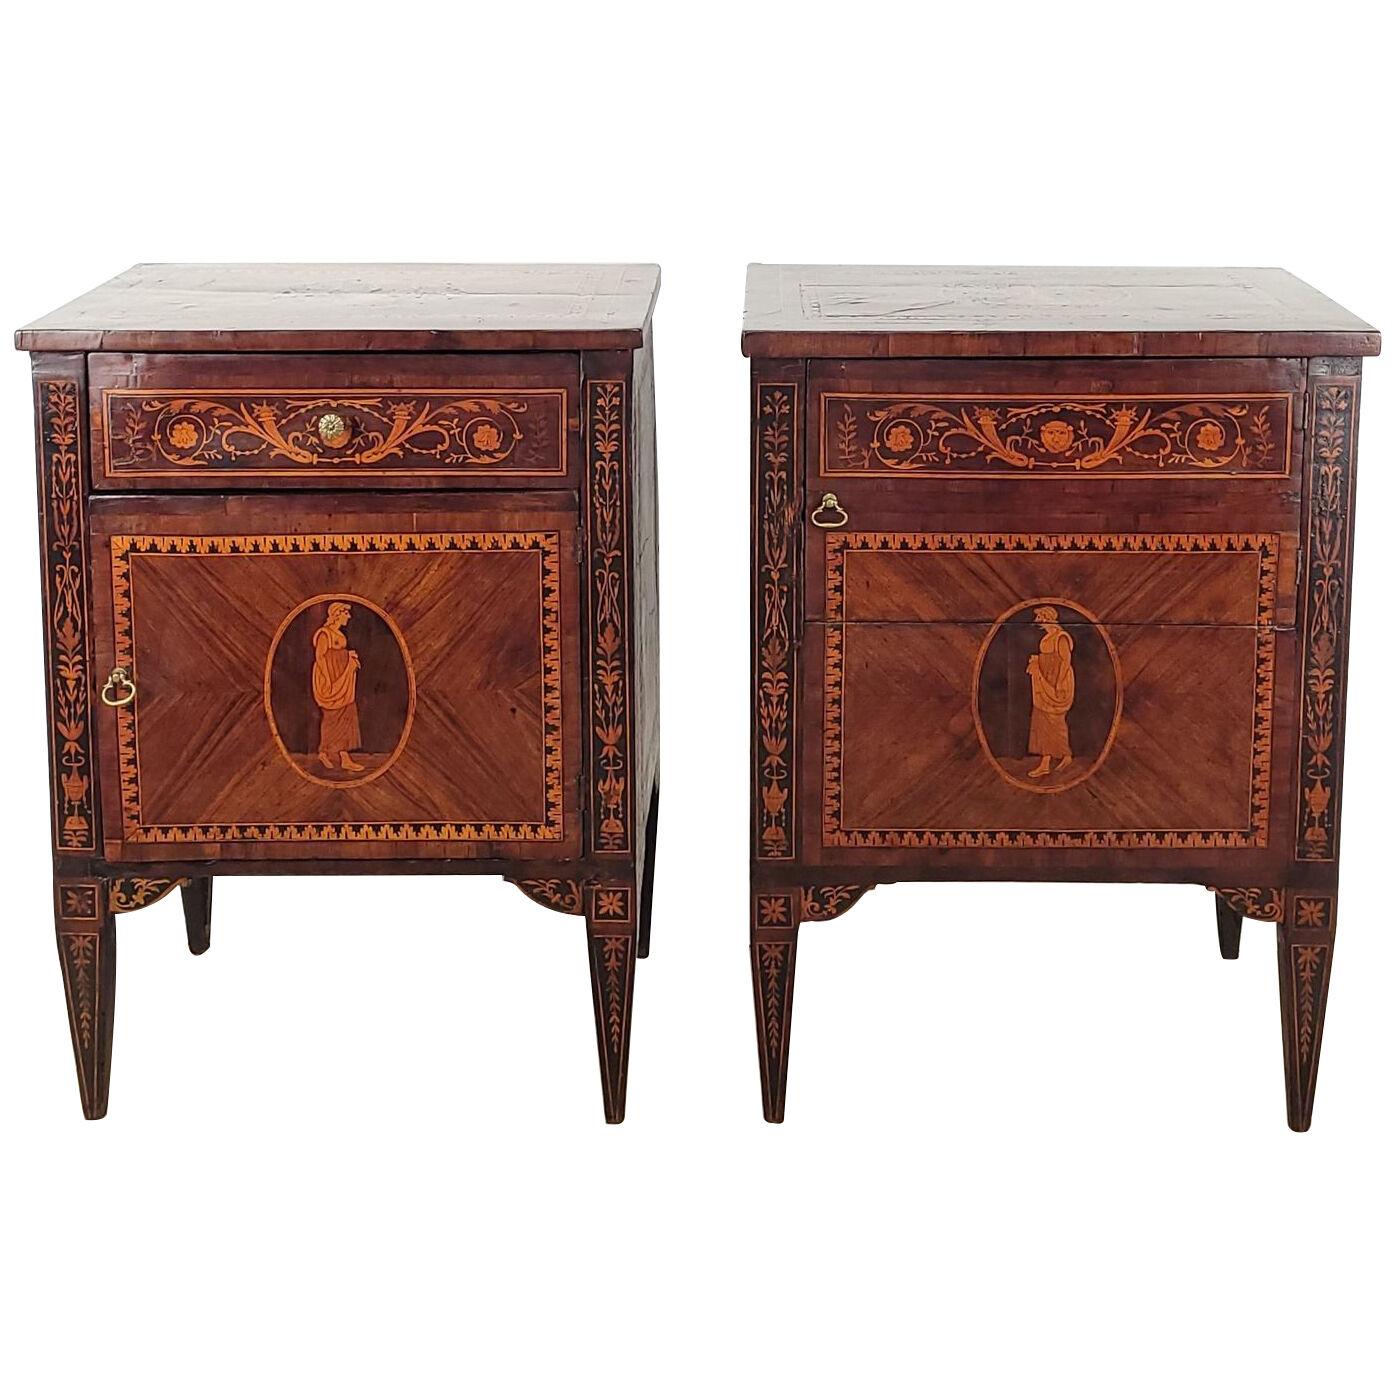 Pair of Italian Bedside Tables, Early 19th Century, Manner of Maggiolini